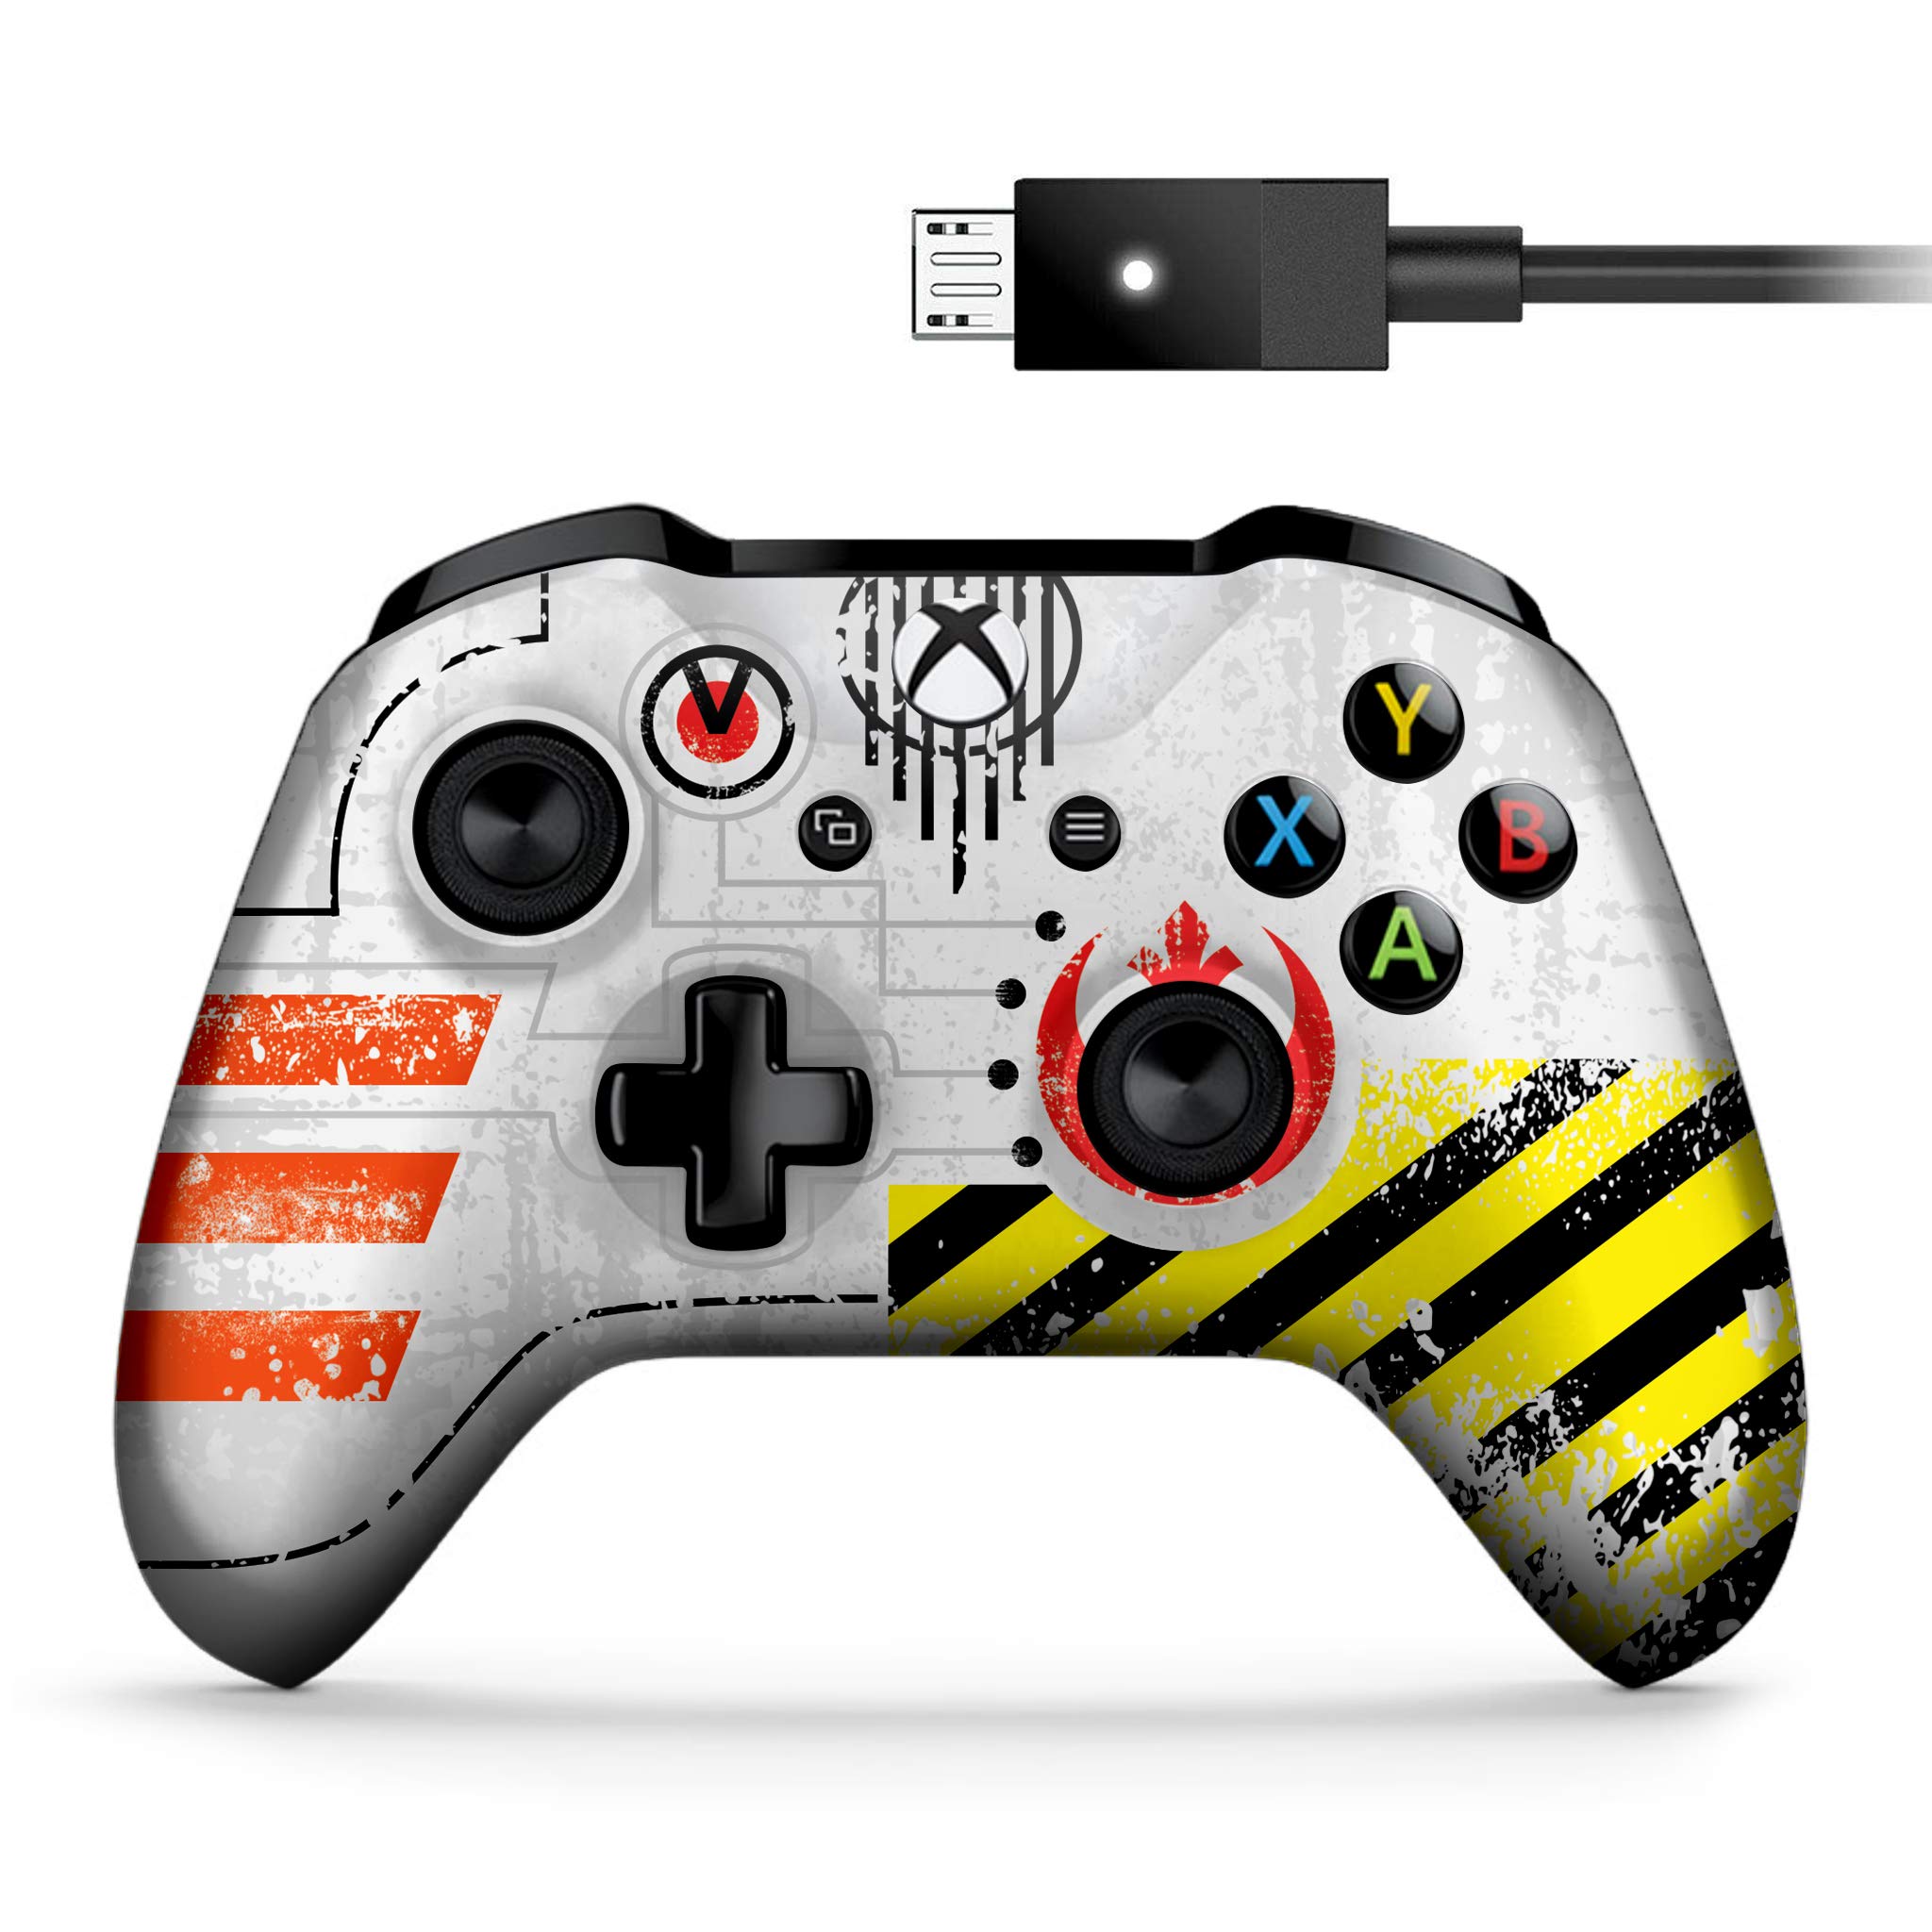 Dream Controller Original Modded Xbox One Controller - Controller Works with Xbox One S / One X / Windows 10 PC - Rapid Fire and Aim Assist Xbox One Controller with Included Mods Manual - image 1 of 7